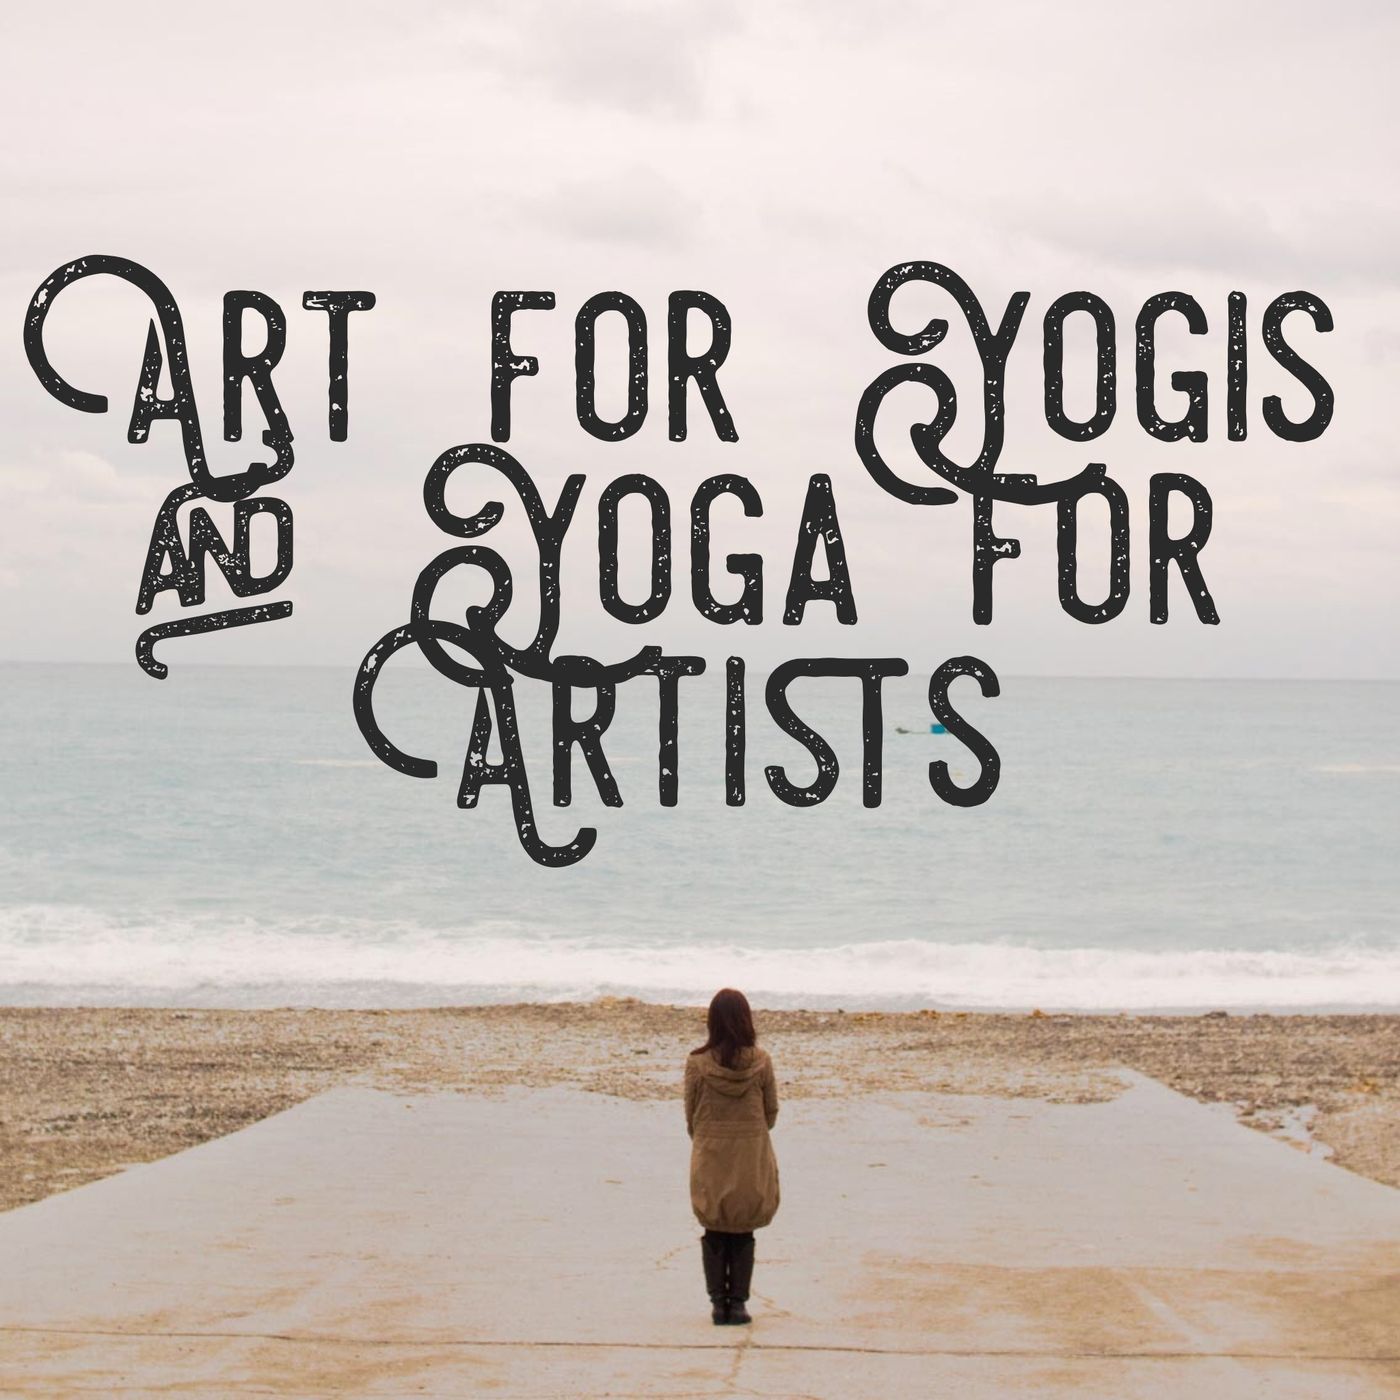 Art for Yogis and Yoga for Artists